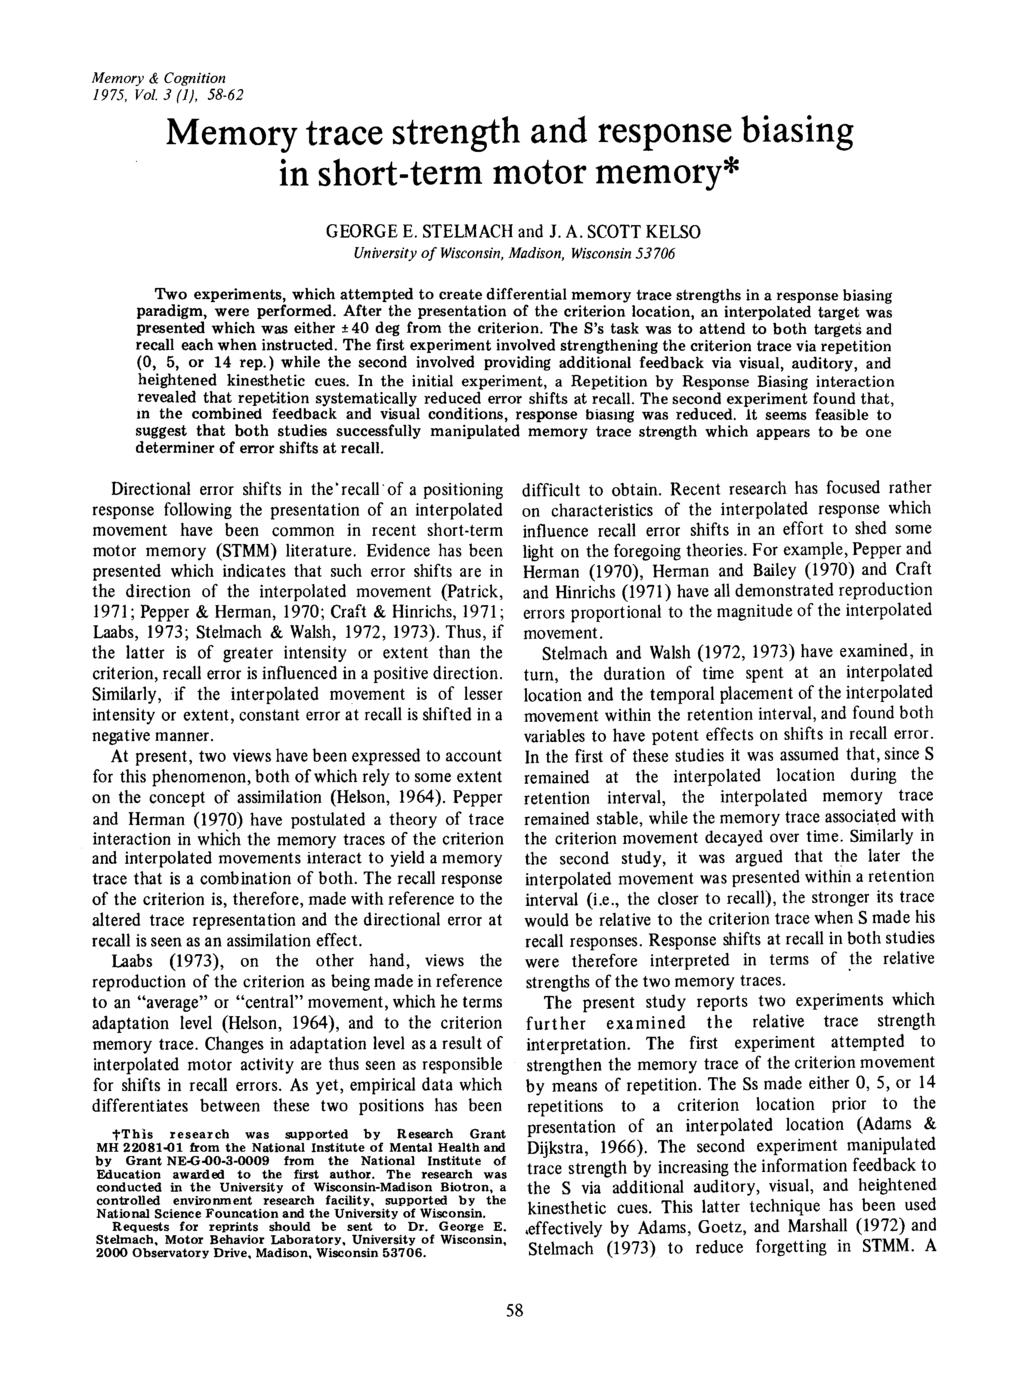 Memory & Cognition 1975, Vol. 3 (1), 58-62 Memory trace strength and response biasing in short-term motor memory* GEORGE E. STELMACH and J. A.